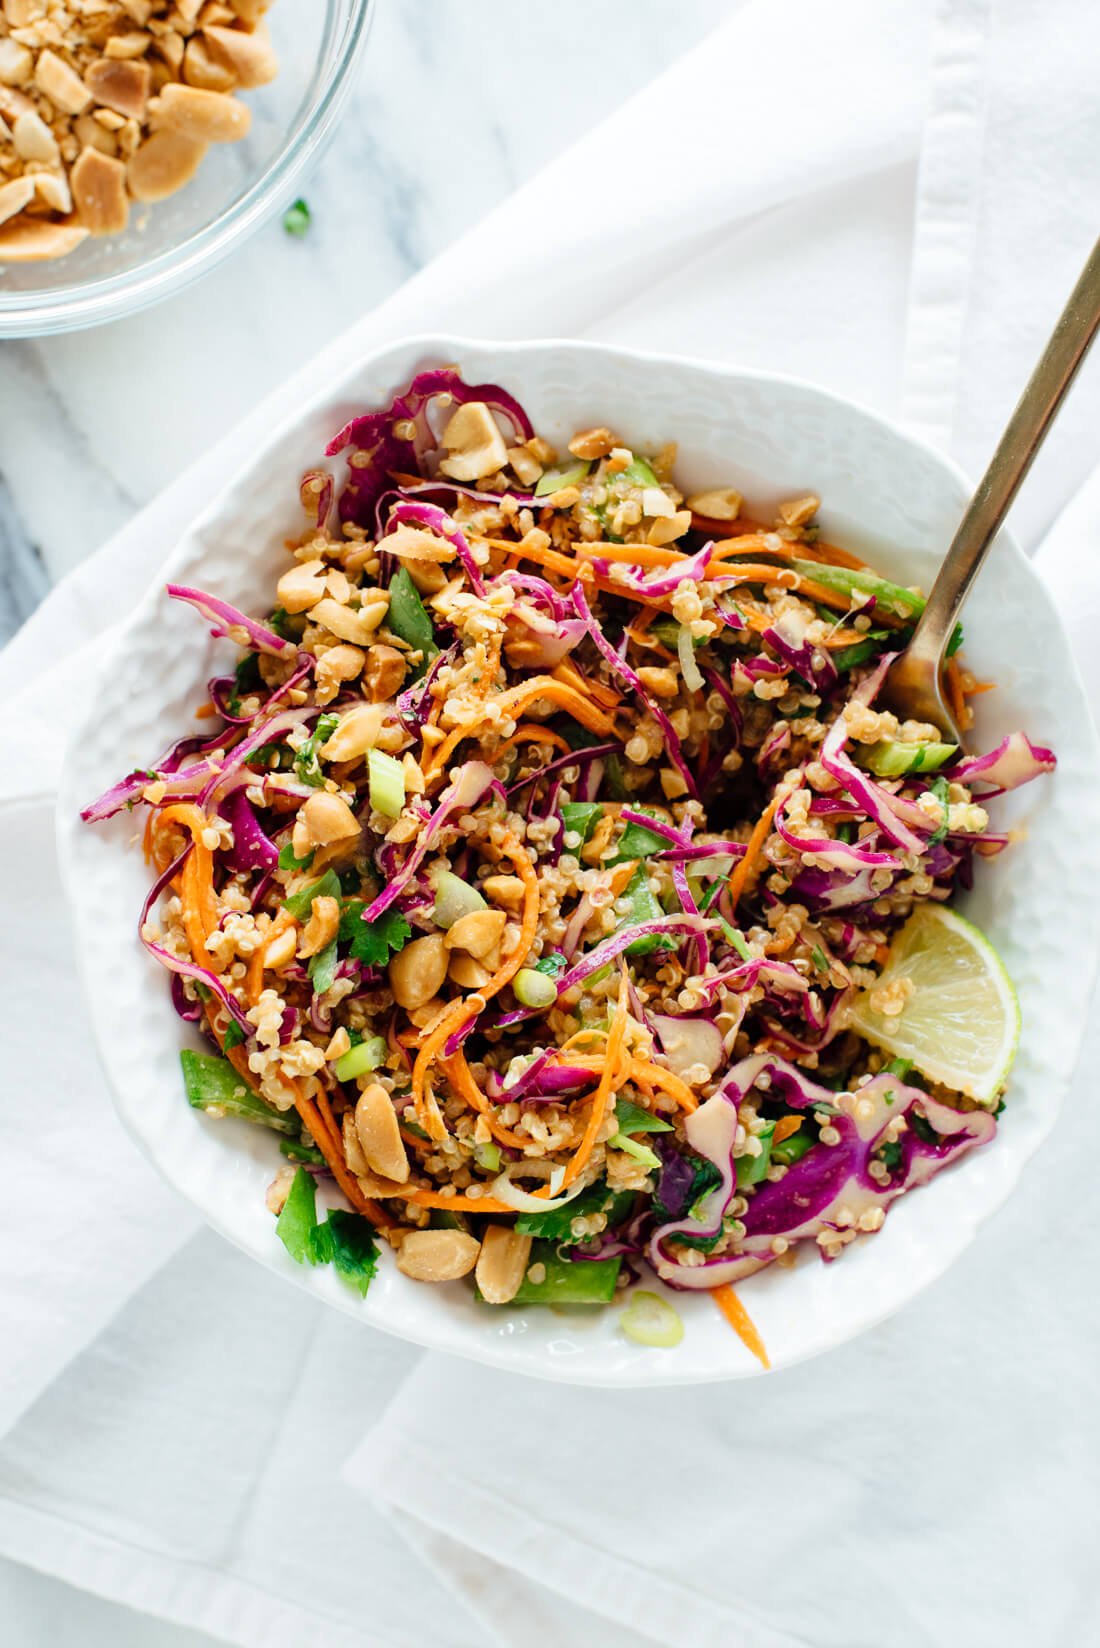 You're going to love this colorful, crunchy Thai peanut quinoa salad! It's made with carrots, cabbage, snow peas, and quinoa, tossed in a delicious peanut sauce. It packs great for lunch. Vegan and gluten free. cookieandkate.com